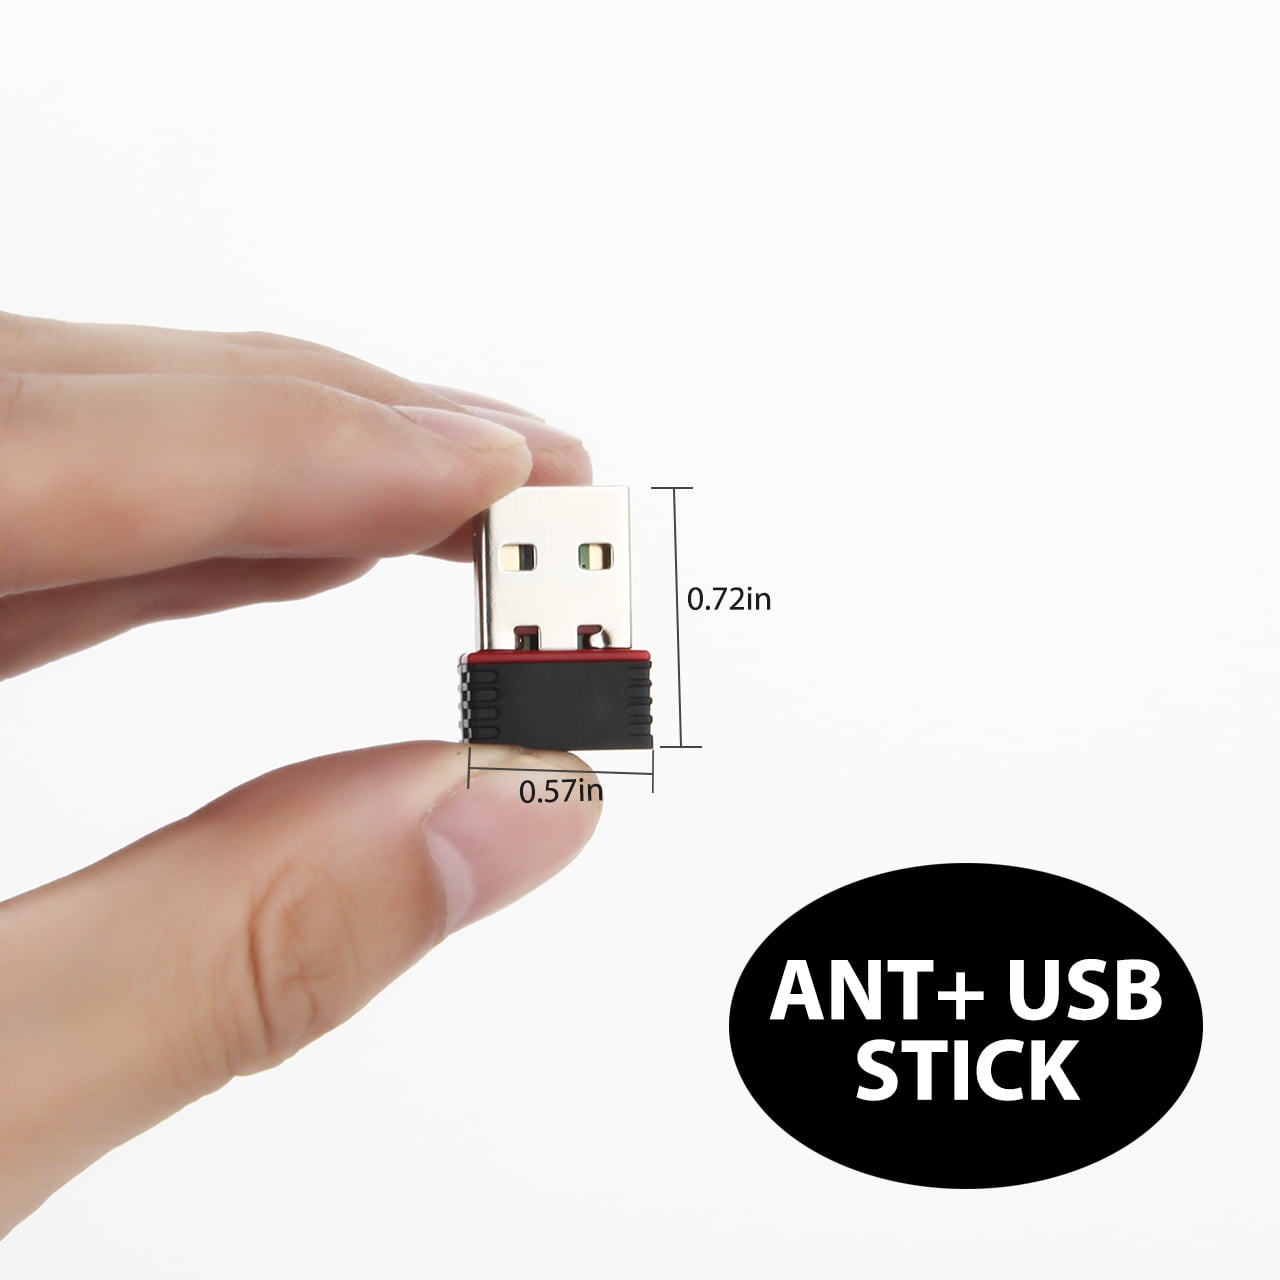 LIVL0V V5 USB ANT+ Dongle for Garmin Fitness Devices, USB ANT Stick Compatible with Zwift TrainerRoad Wahoo Cycleops Trainer TacX Sufferfest PerfPRO - Walmart.com